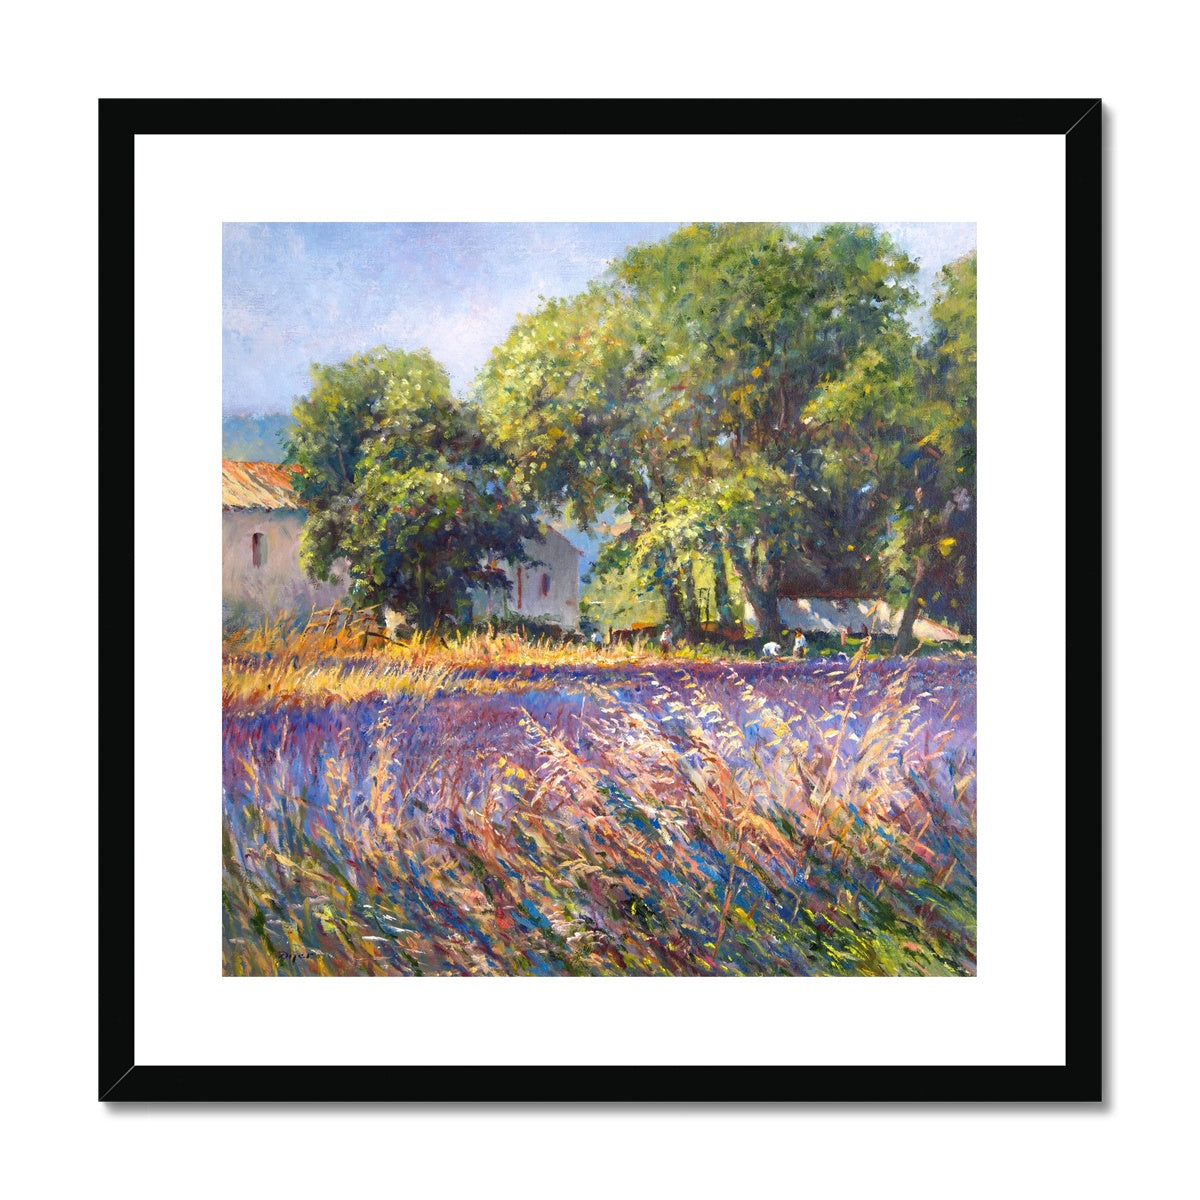 Ted Dyer Framed Open Edition Cornish Fine Art Print. 'Lavender Time, Provence'. Cornwall Art Gallery